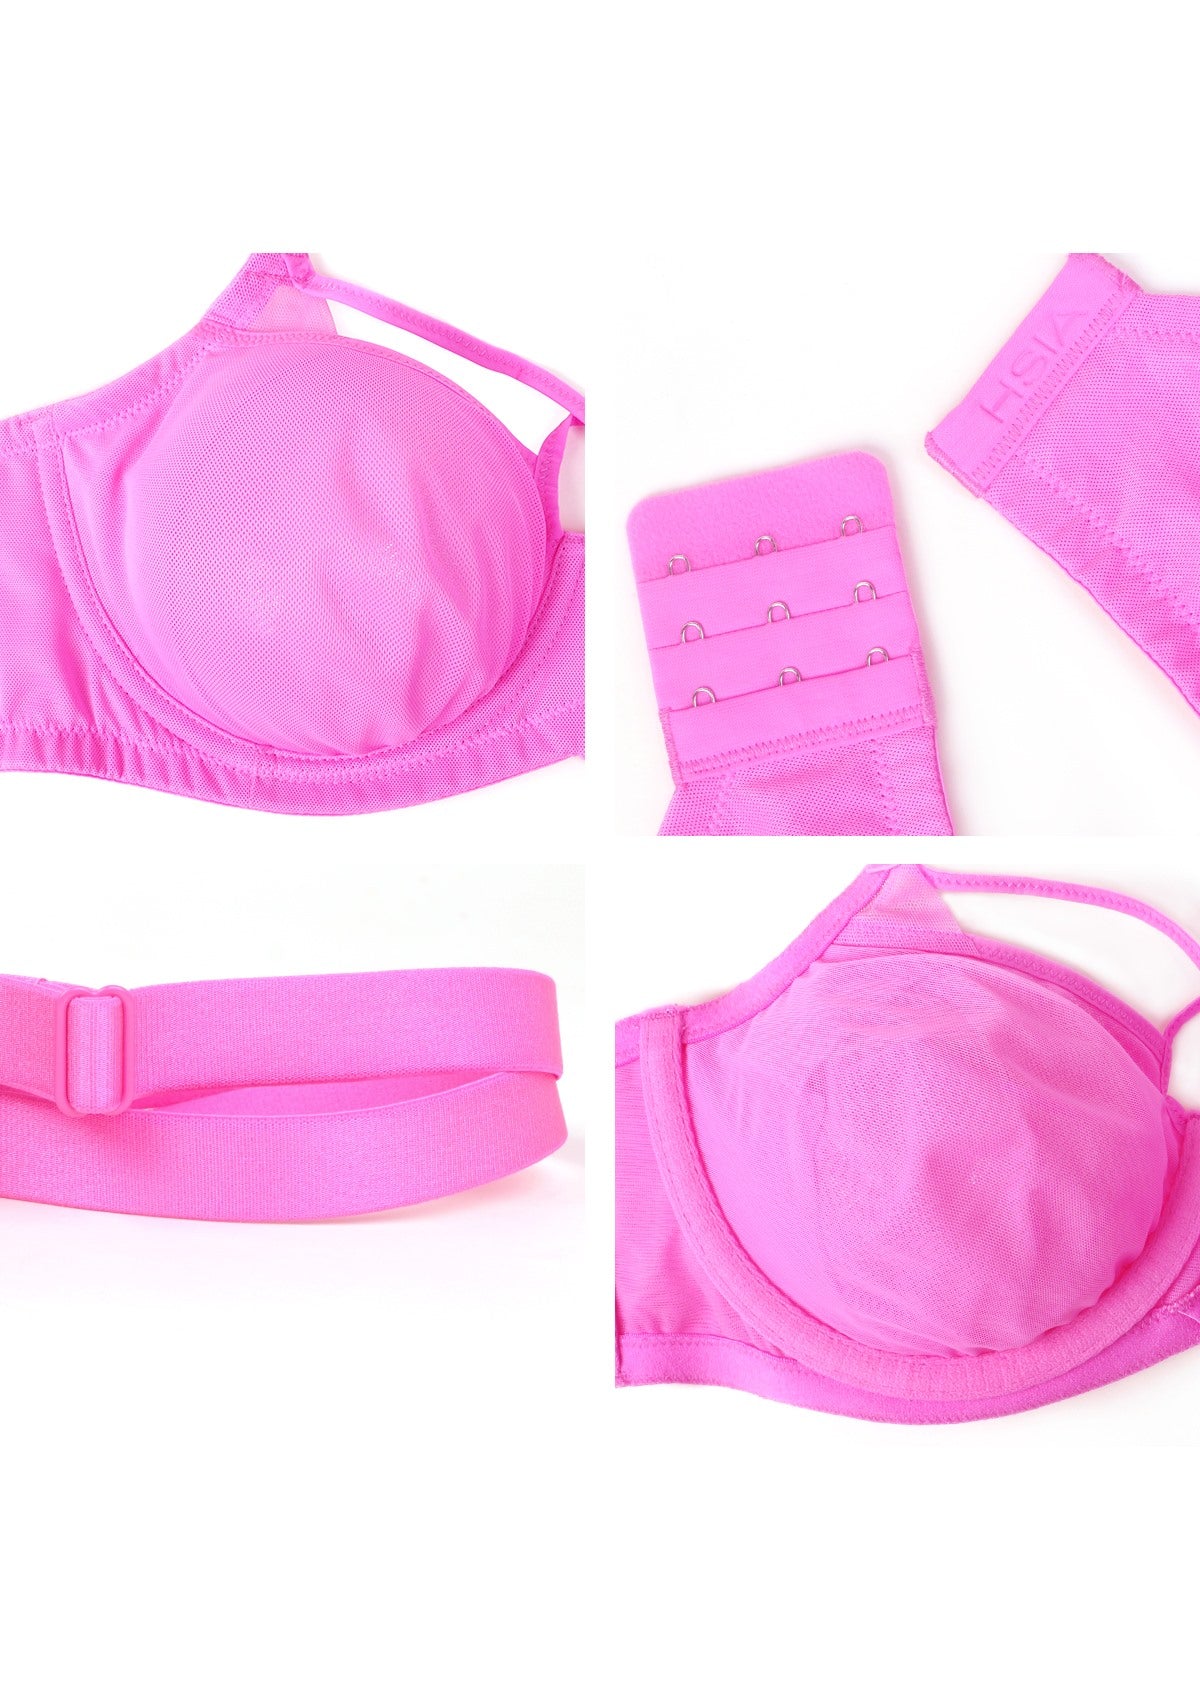 HSIA Billie Cross Front Strap Smooth Sheer Mesh Comfy Underwire Bra - Barbie Pink / 34 / D